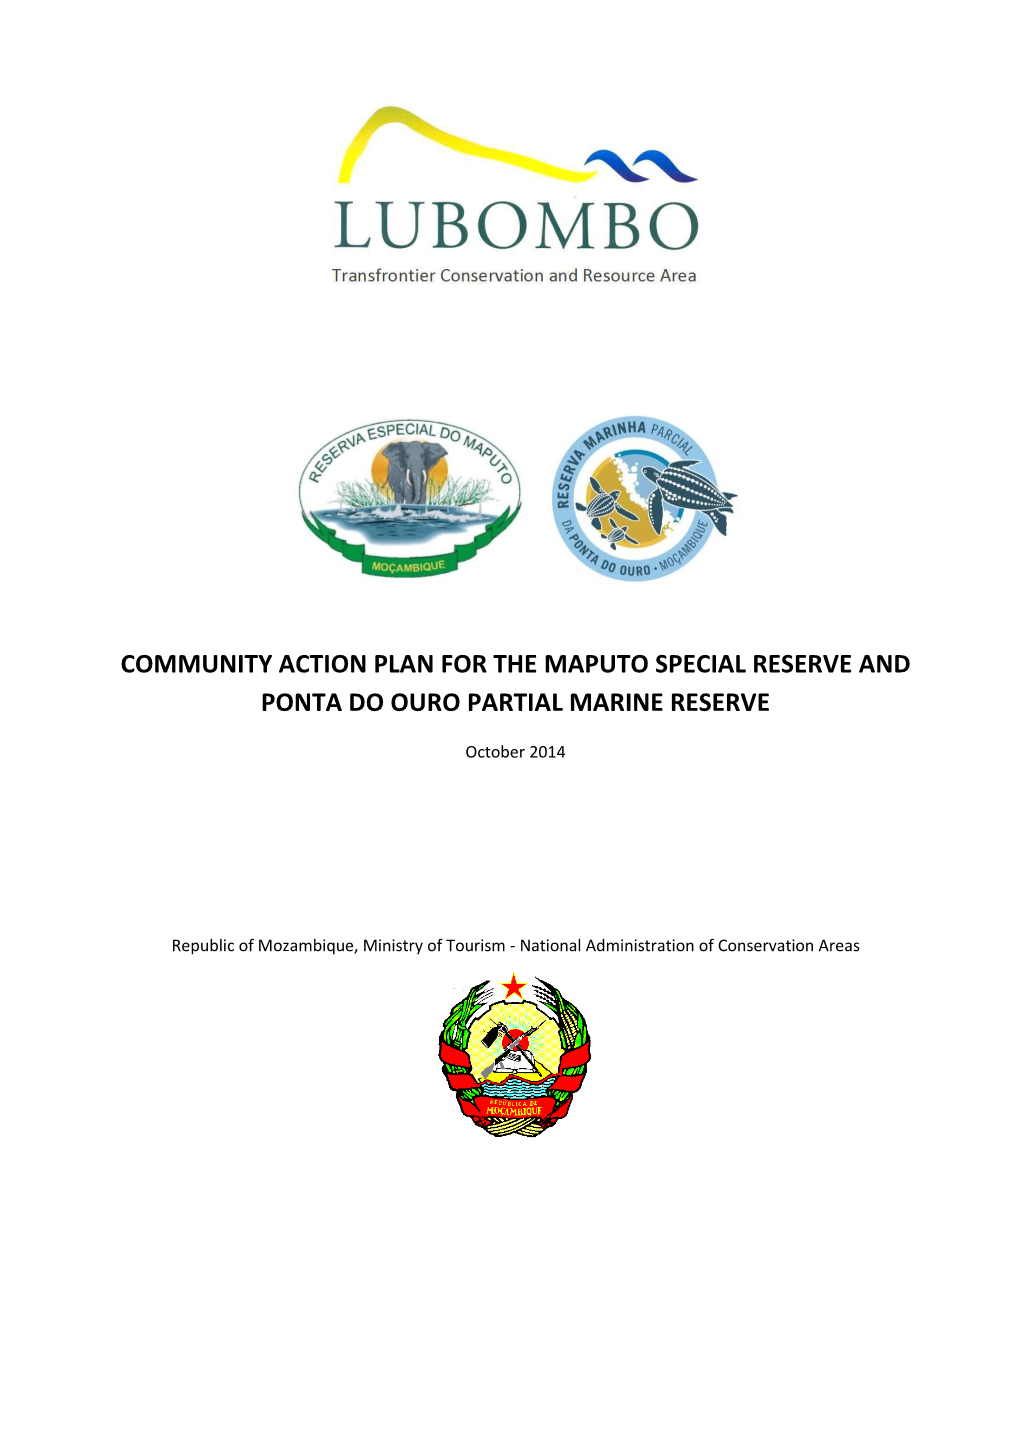 Community Action Plan for the Maputo Special Reserve and Ponta Do Ouro Partial Marine Reserve